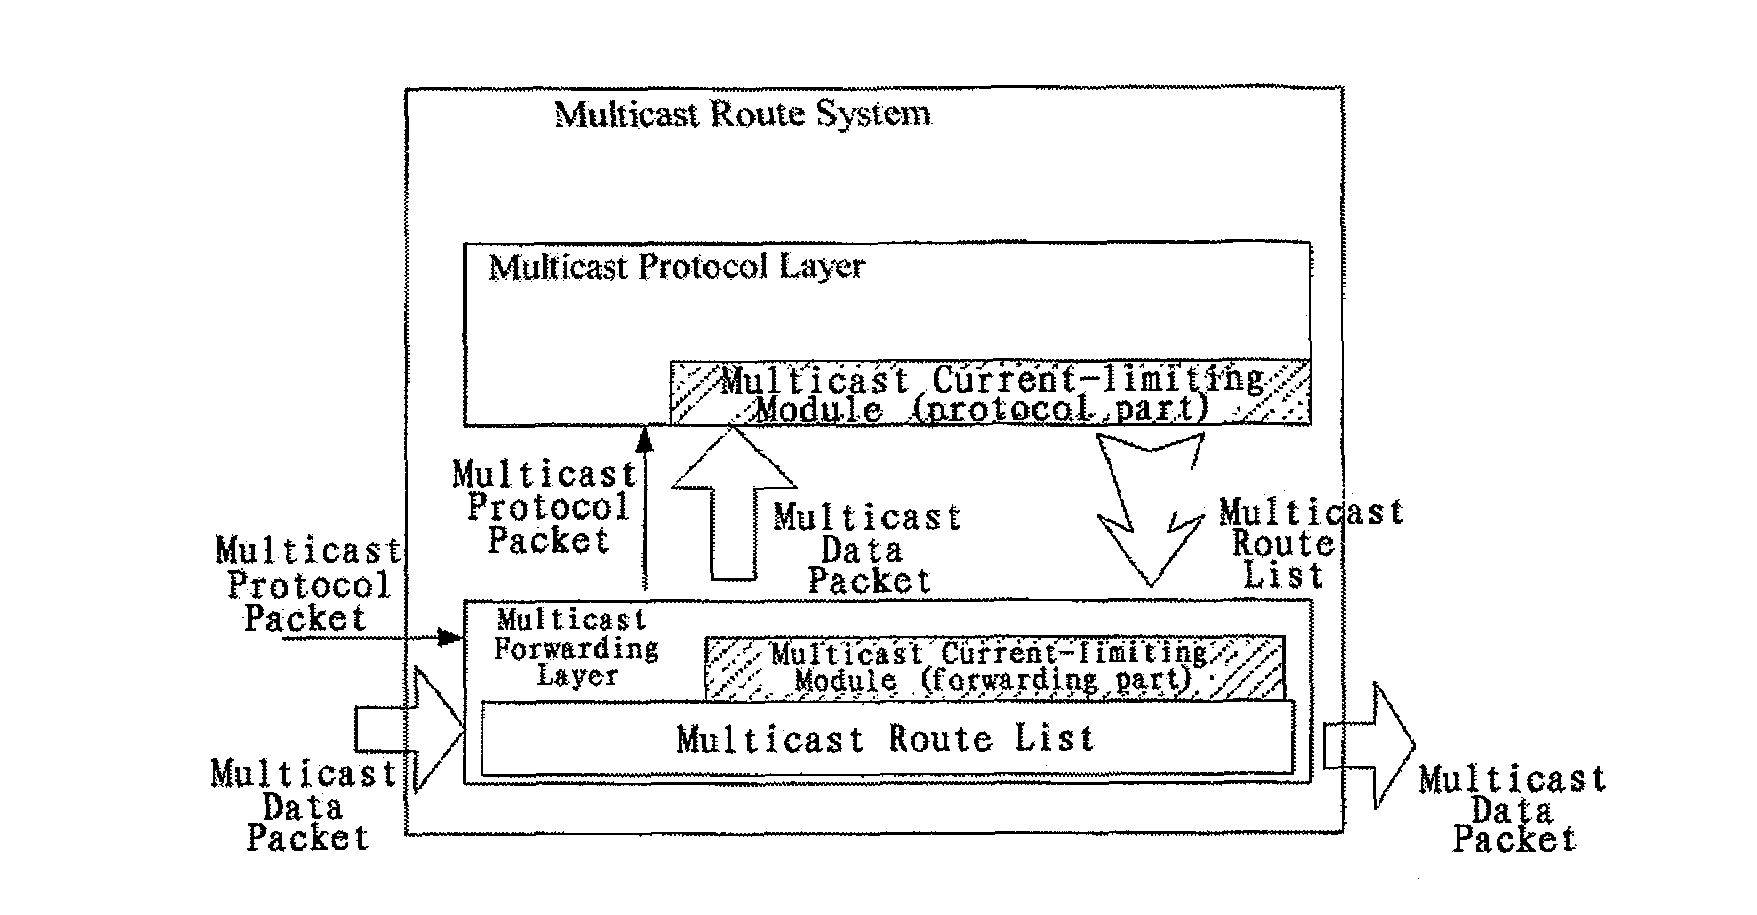 Method for Preventing Ip Multicast Data Stream to Overload Communication System by Distinguishing All Kinds of Services